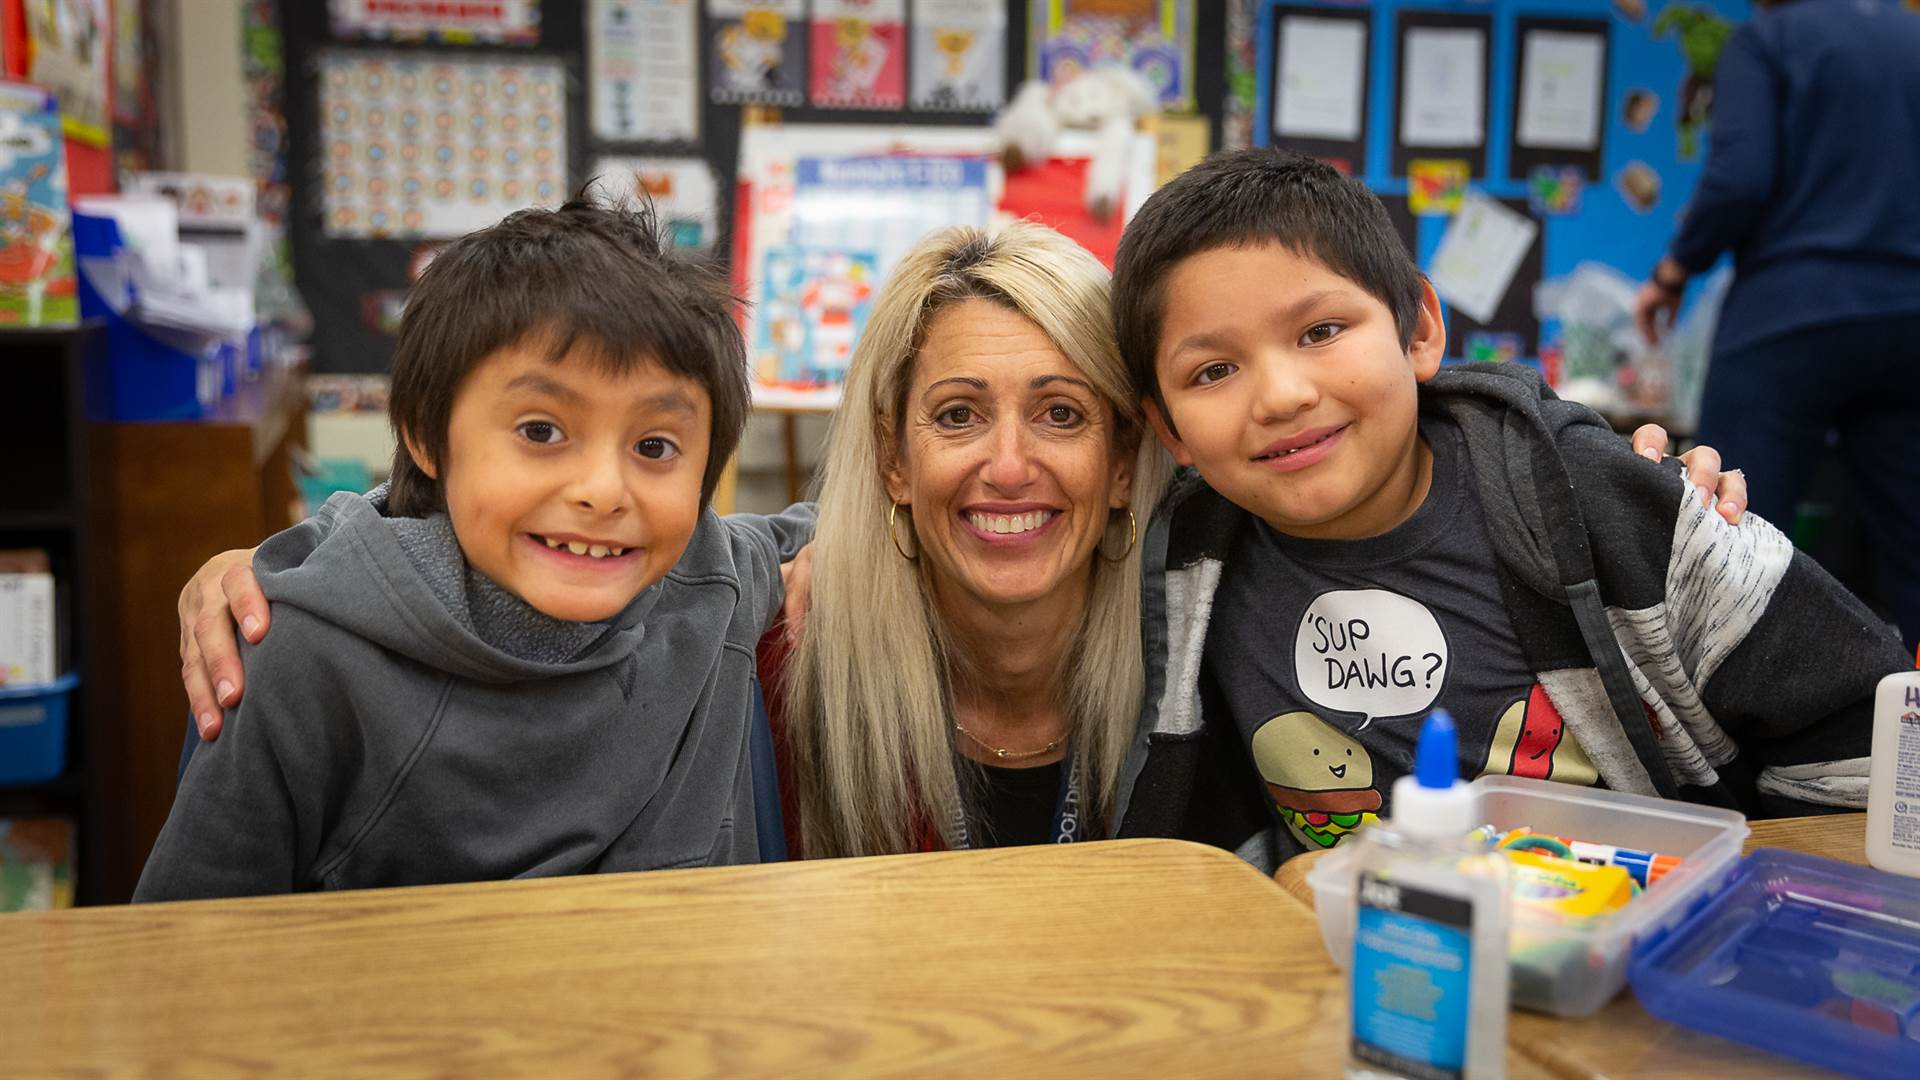 Teacher and students smiling